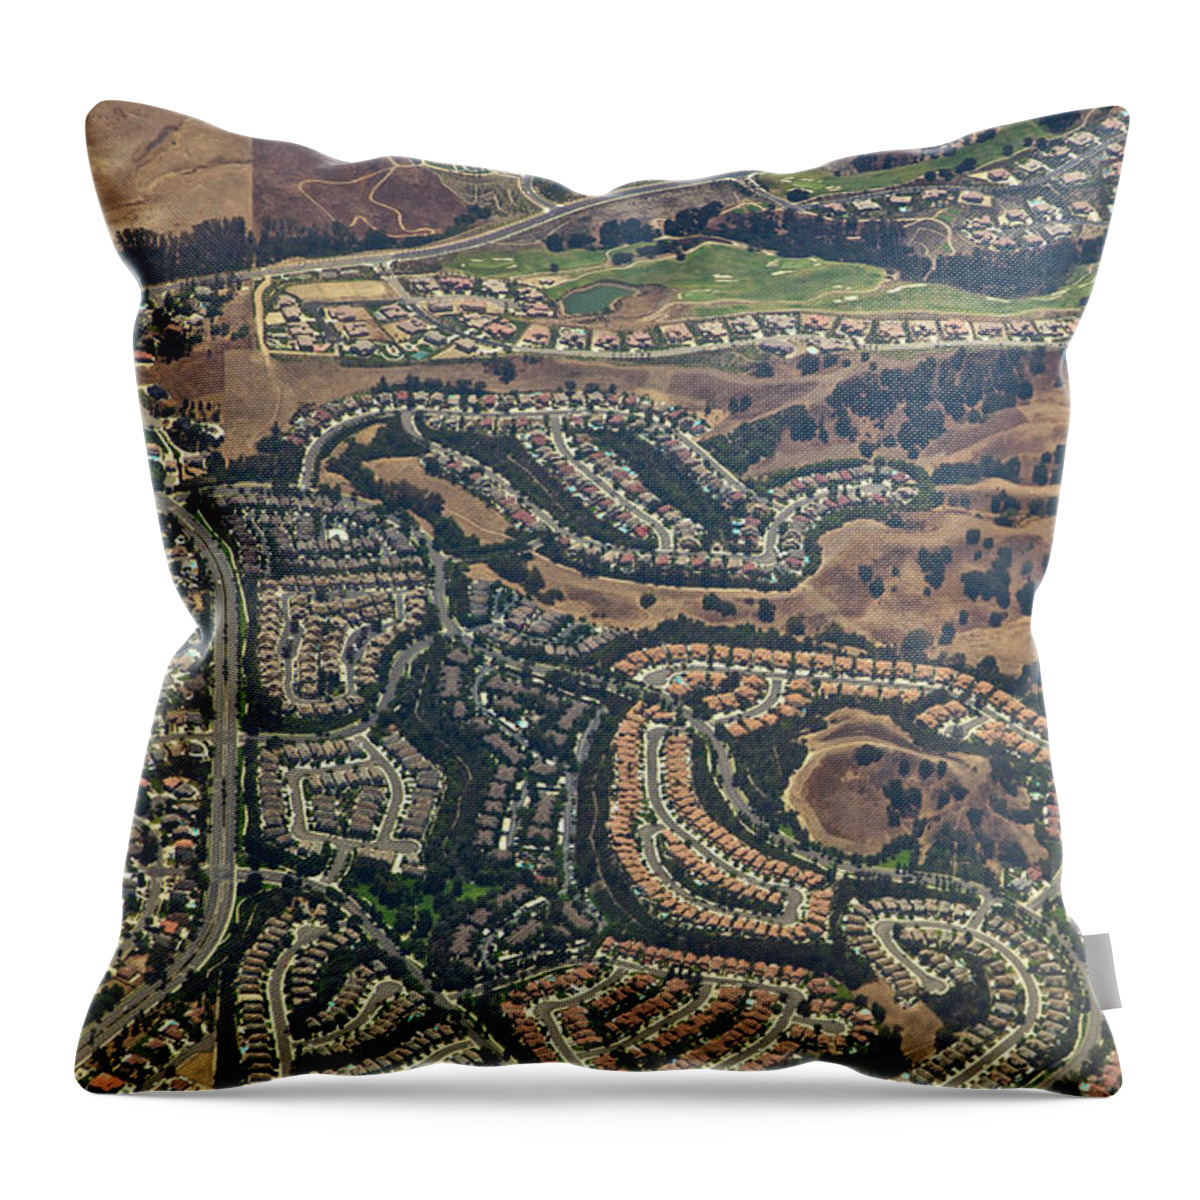 Suburb Throw Pillow featuring the photograph Anheim Hills Subdivision by Pastorscott